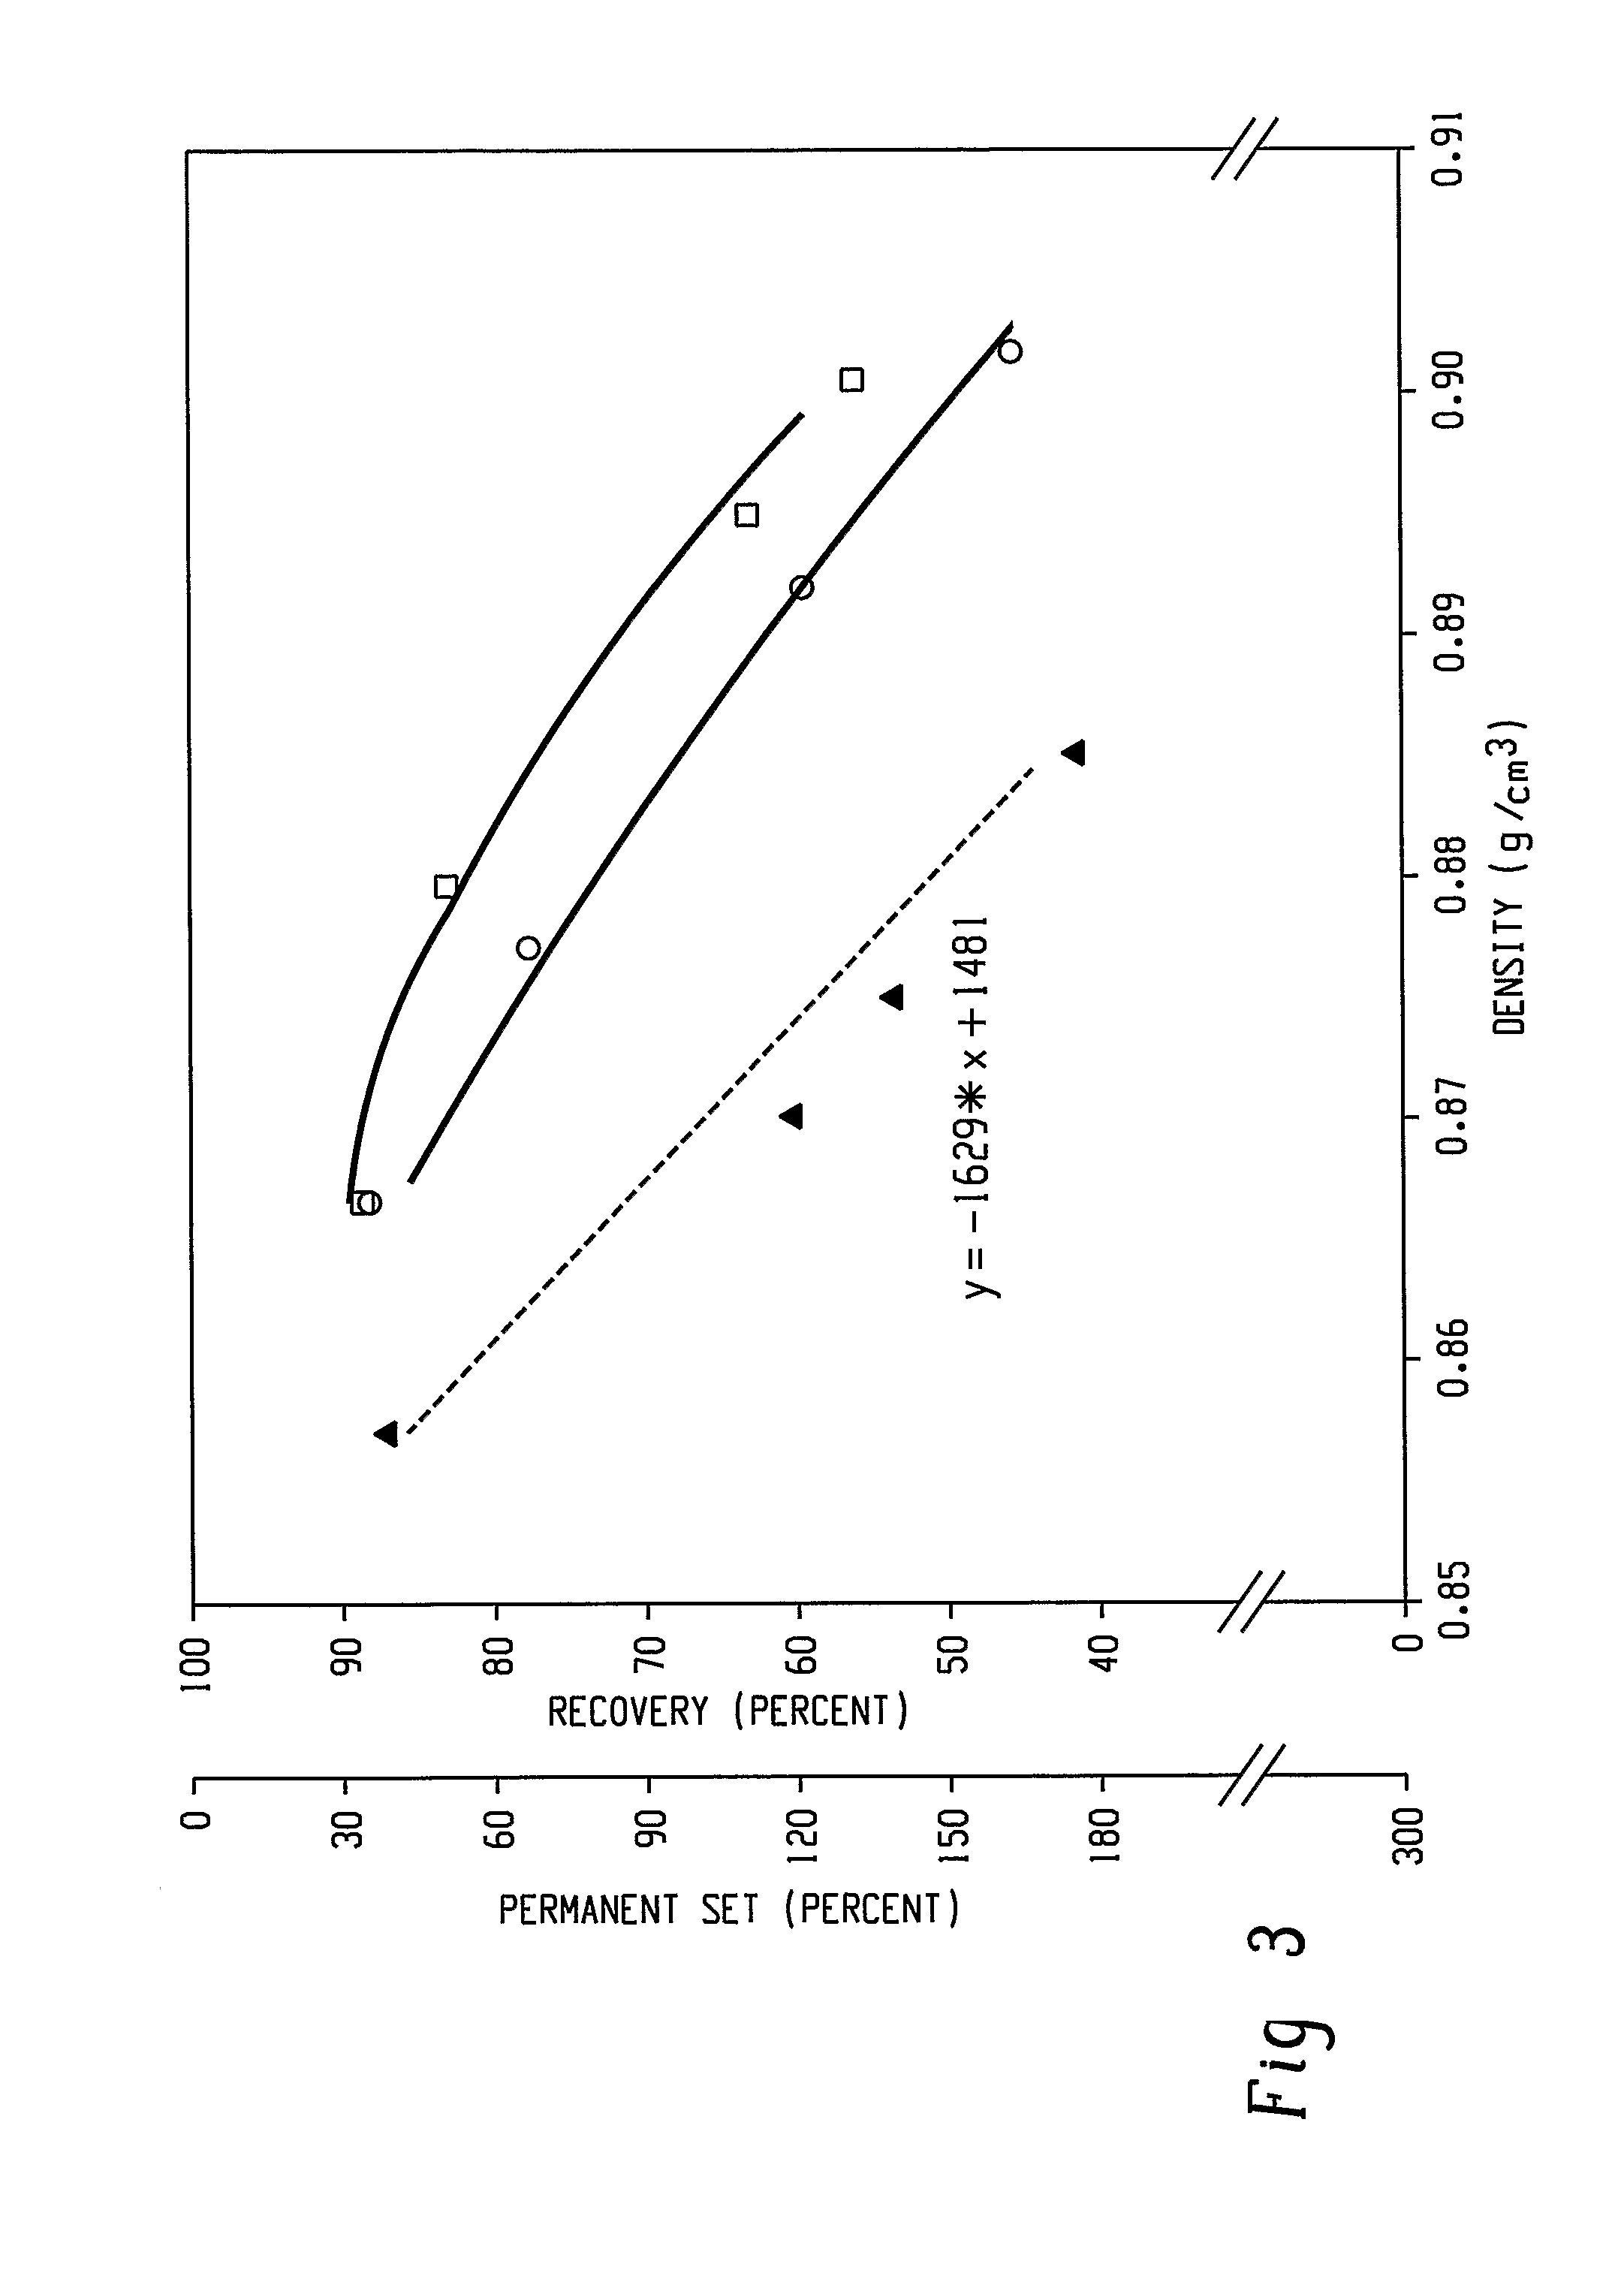 Fibers made from copolymers of ethylene/α-olefins